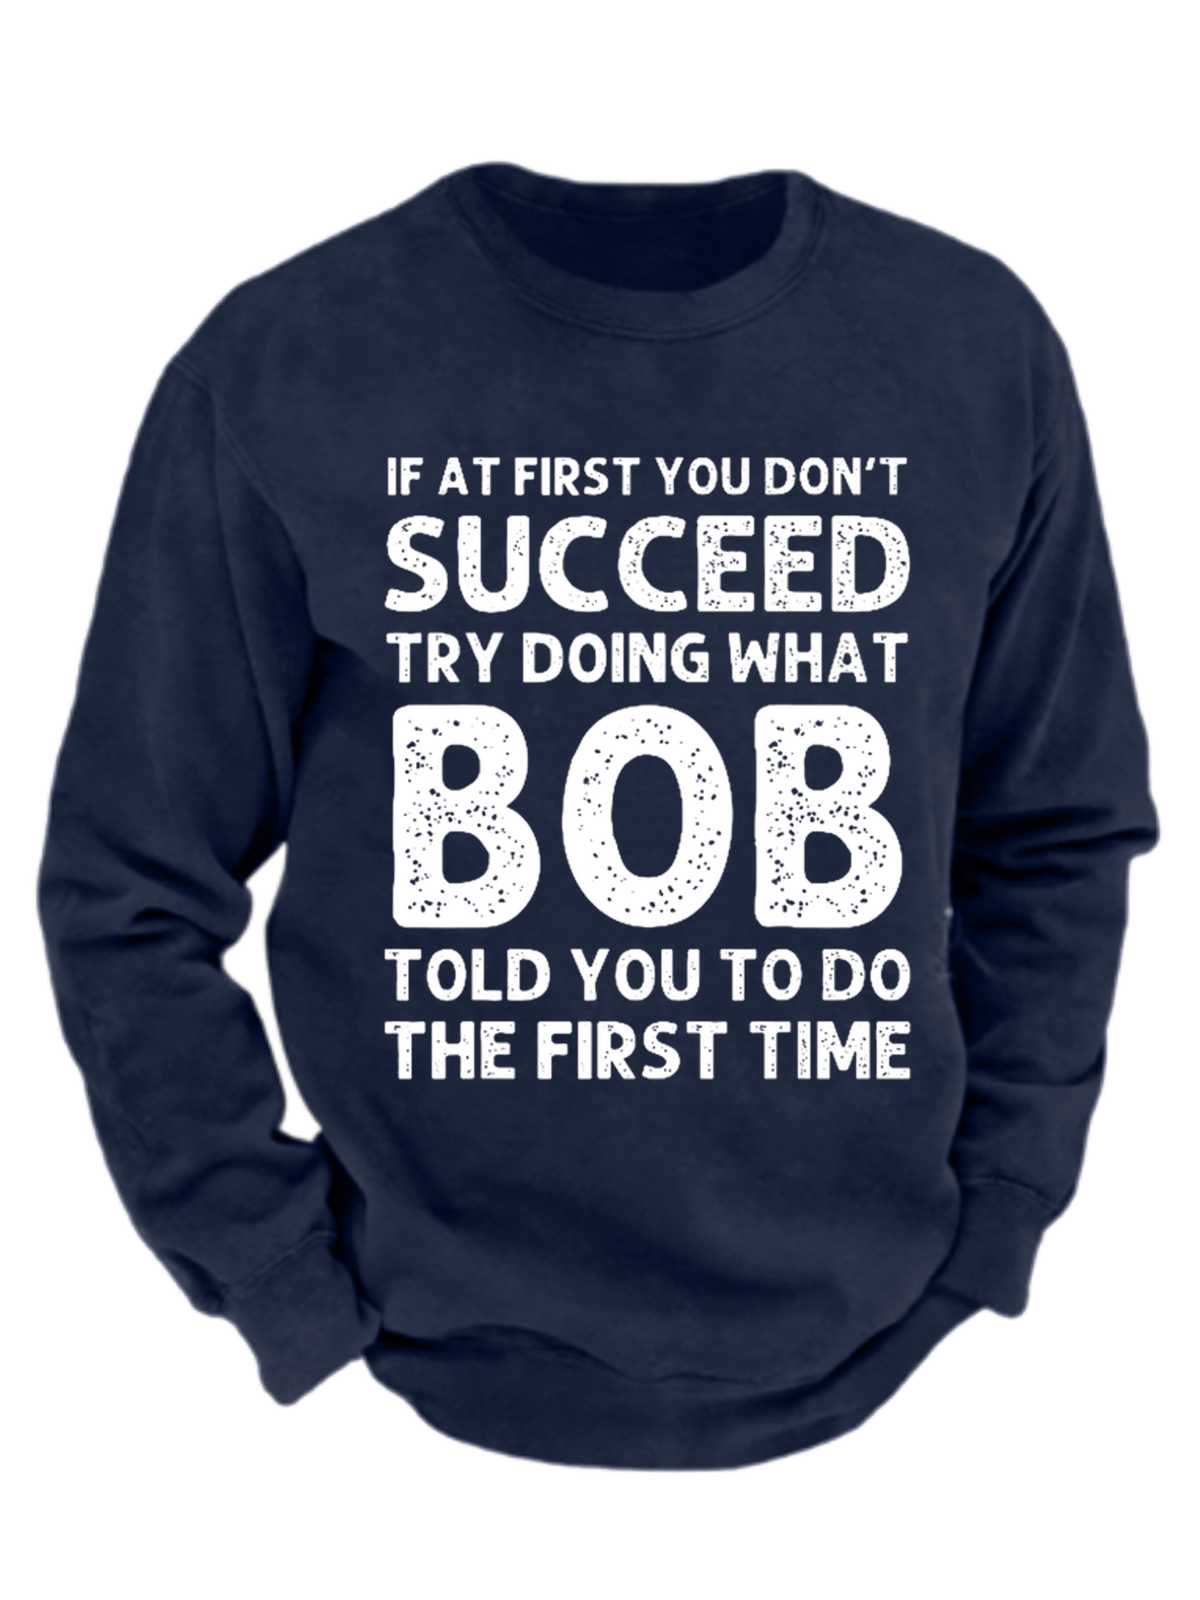 Men's Funny If At First You Don'T Succeed Try Doing What Bob Told You To Do The First Time Graphic Printing Crew Neck Sweatshirt